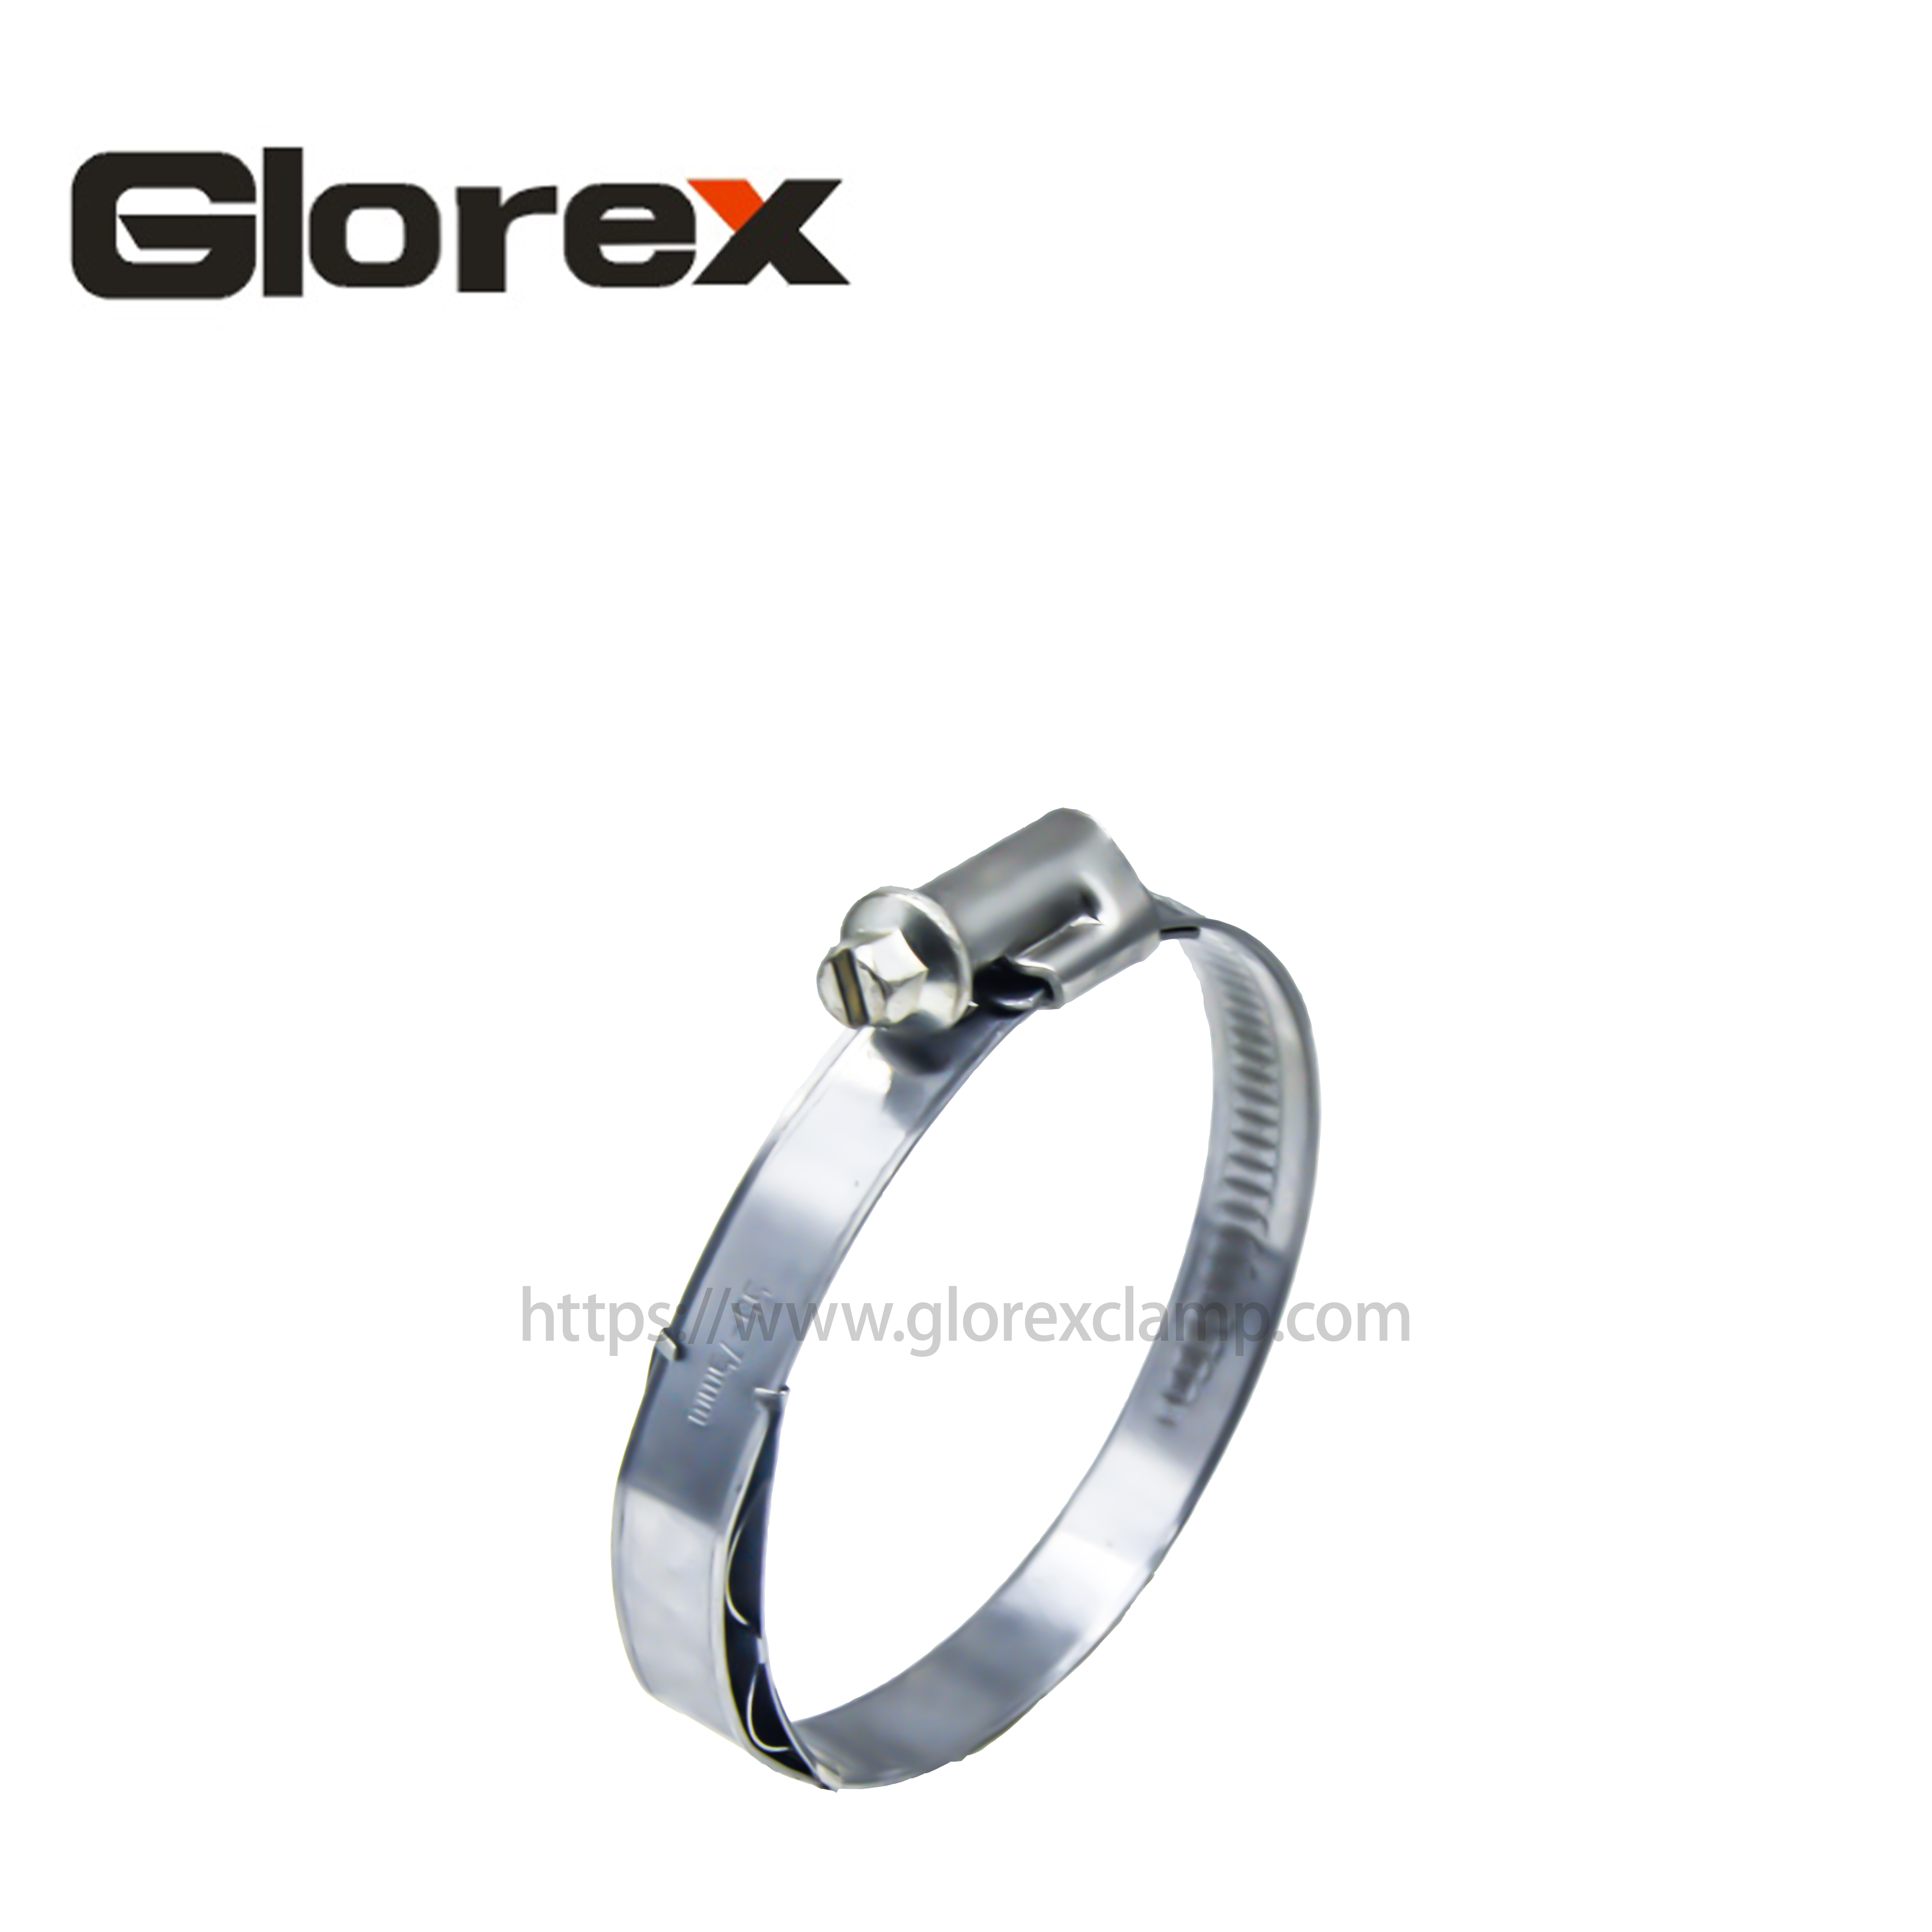 OEM/ODM Supplier Rad Hose Clamp - German type hose clamp without welding(with a spring) – Glorex